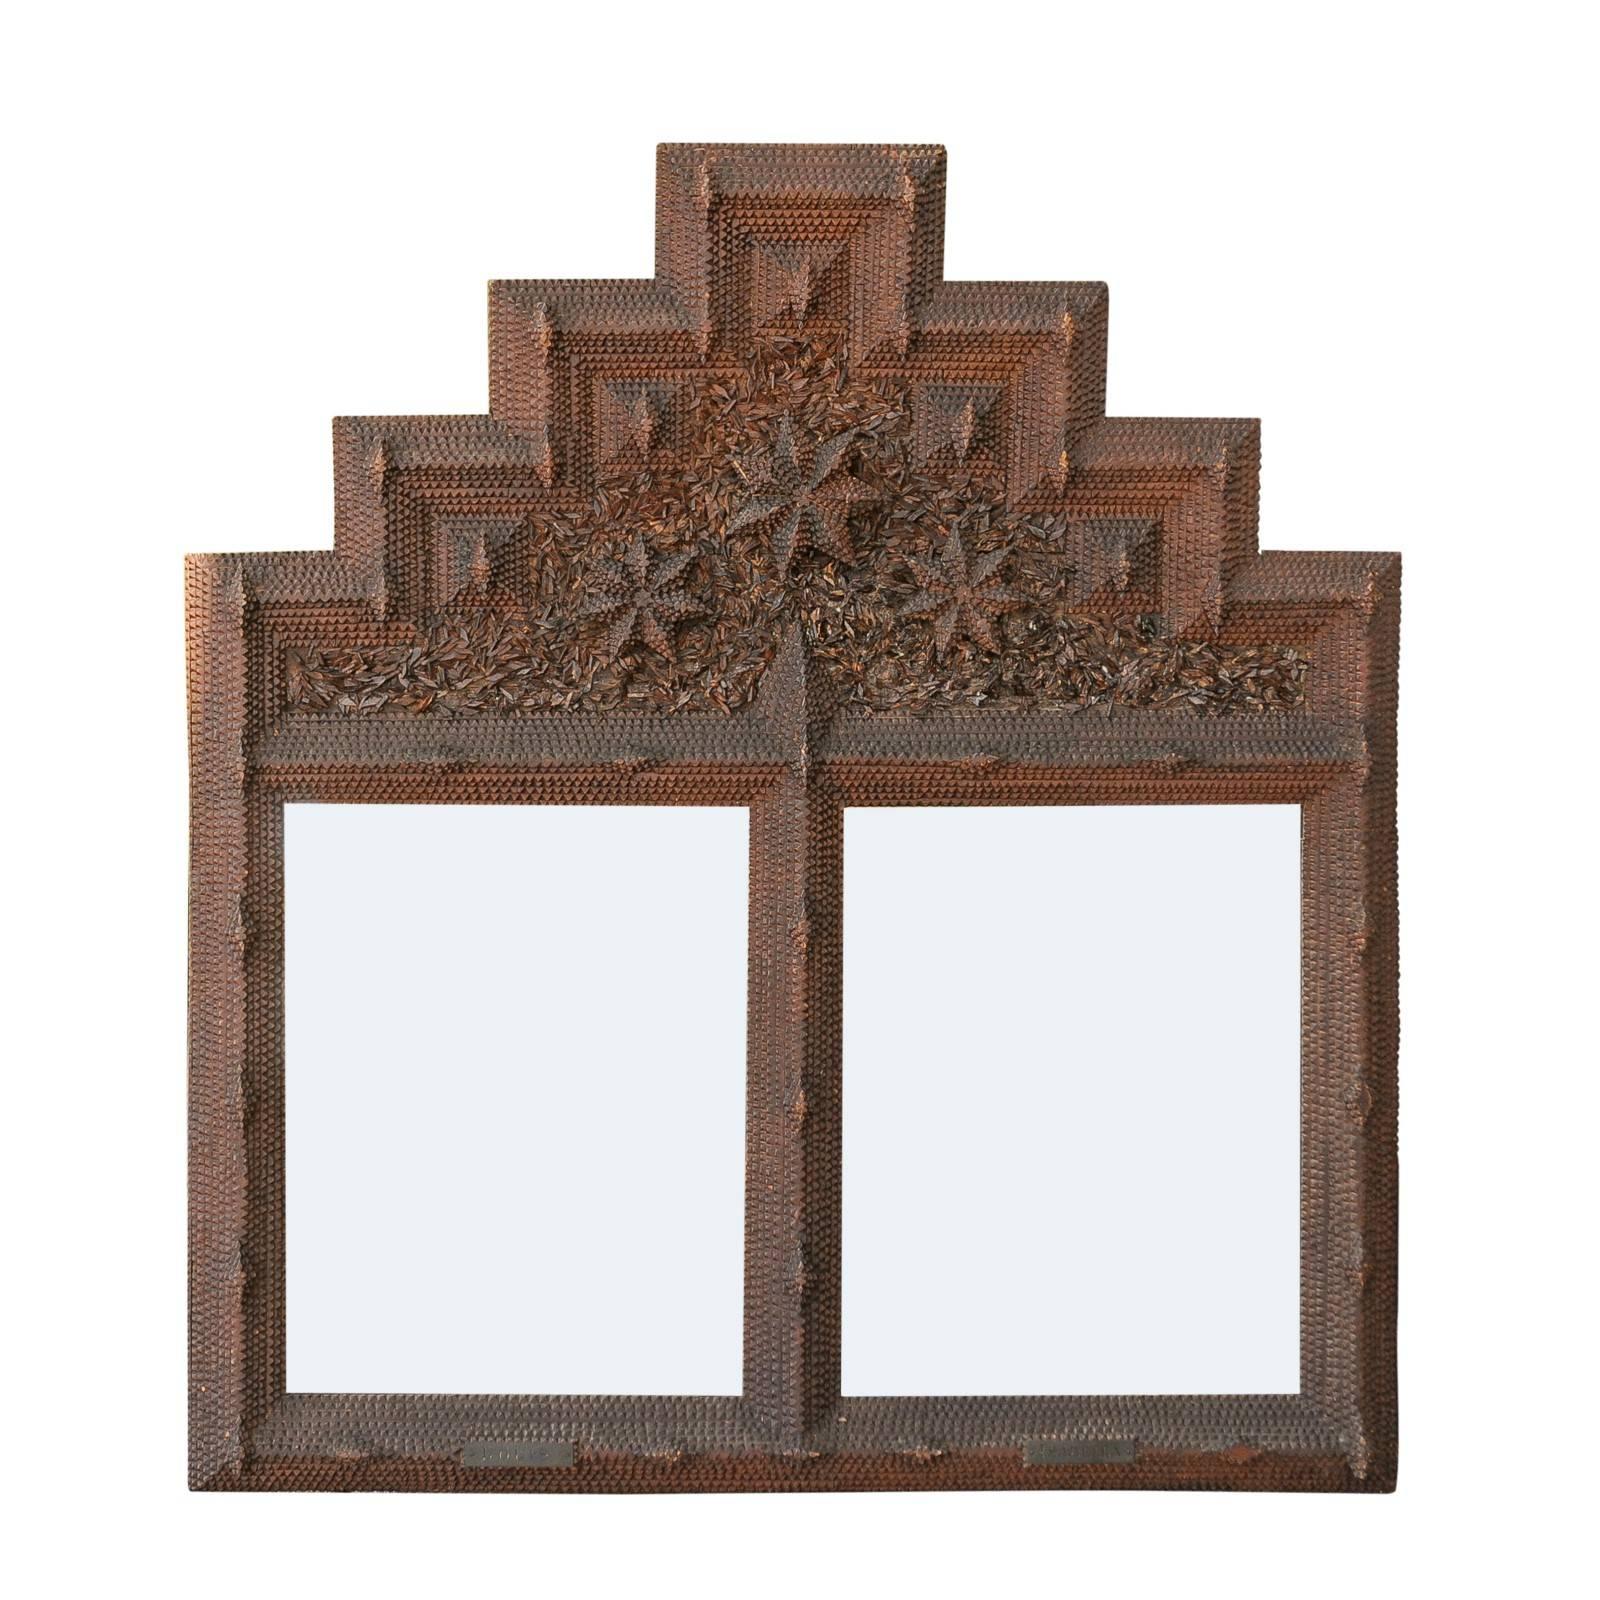 French Tramp Art Mirror with Stepped Pyramidal Crest and Star Motifs, circa 1900